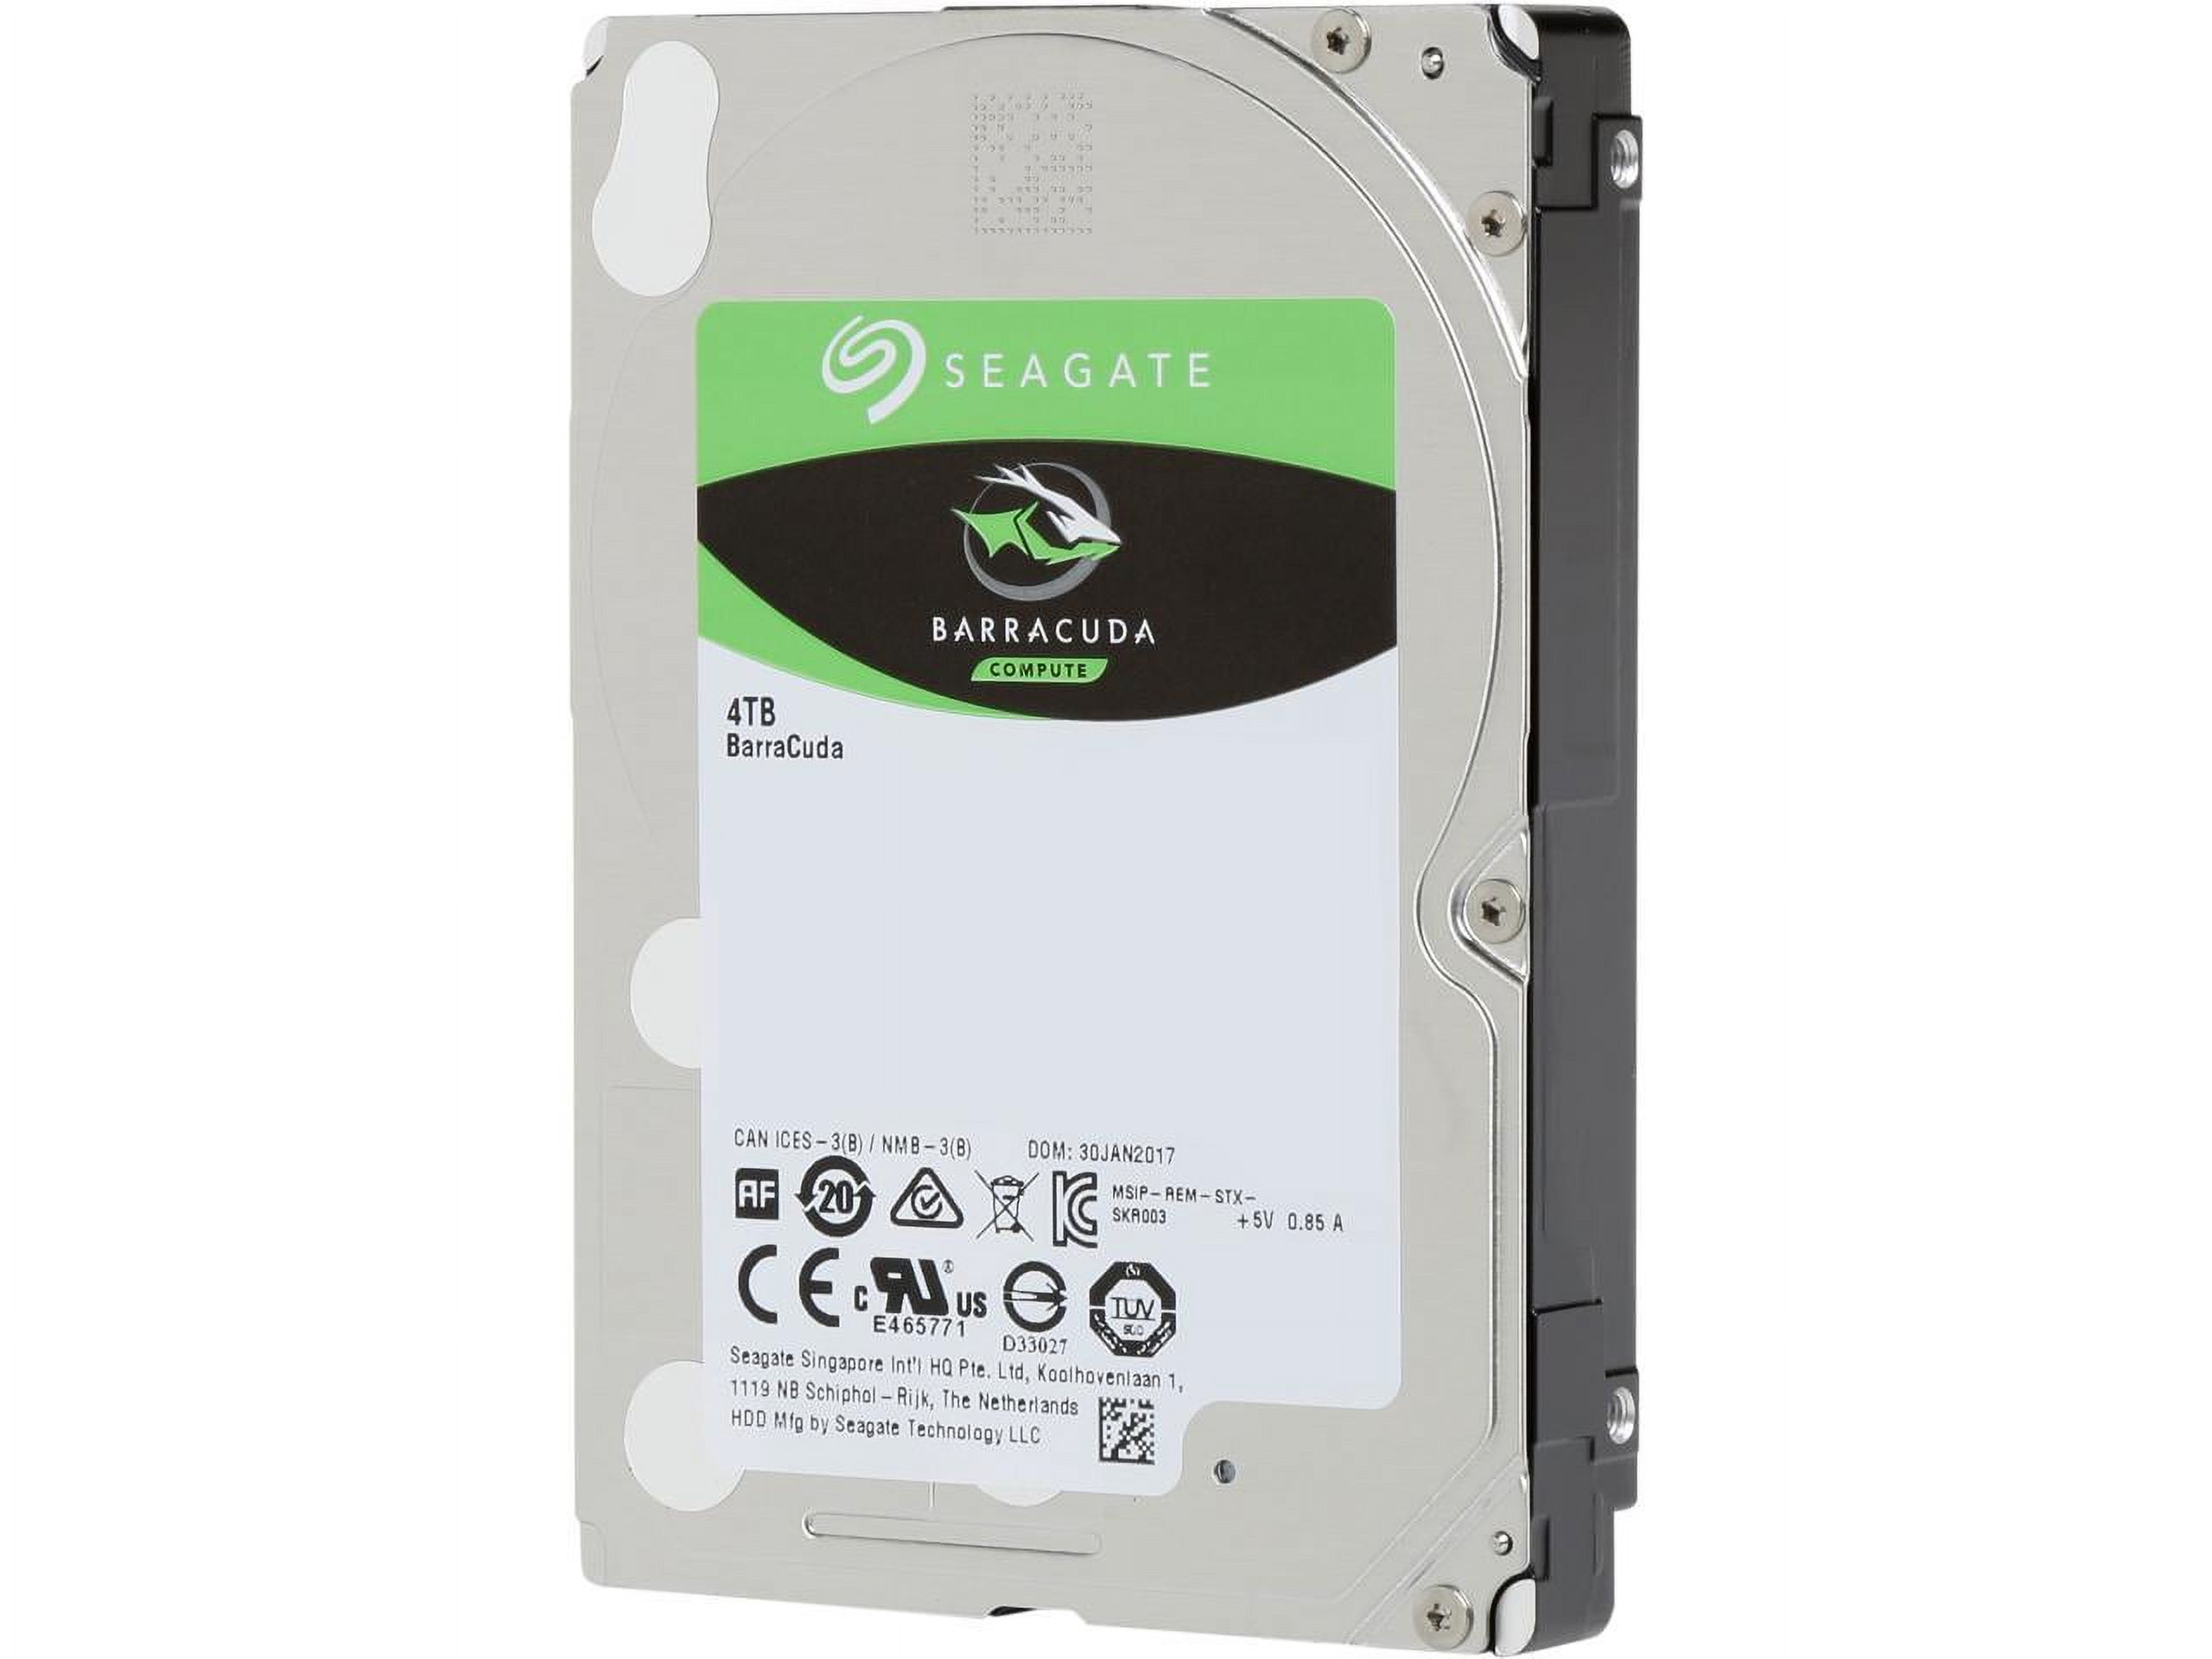 Seagate BarraCuda Mobile Hard Drive 4TB SATA 6Gb/s 128MB Cache 2.5-Inch 15mm (ST4000LM024) - image 1 of 3